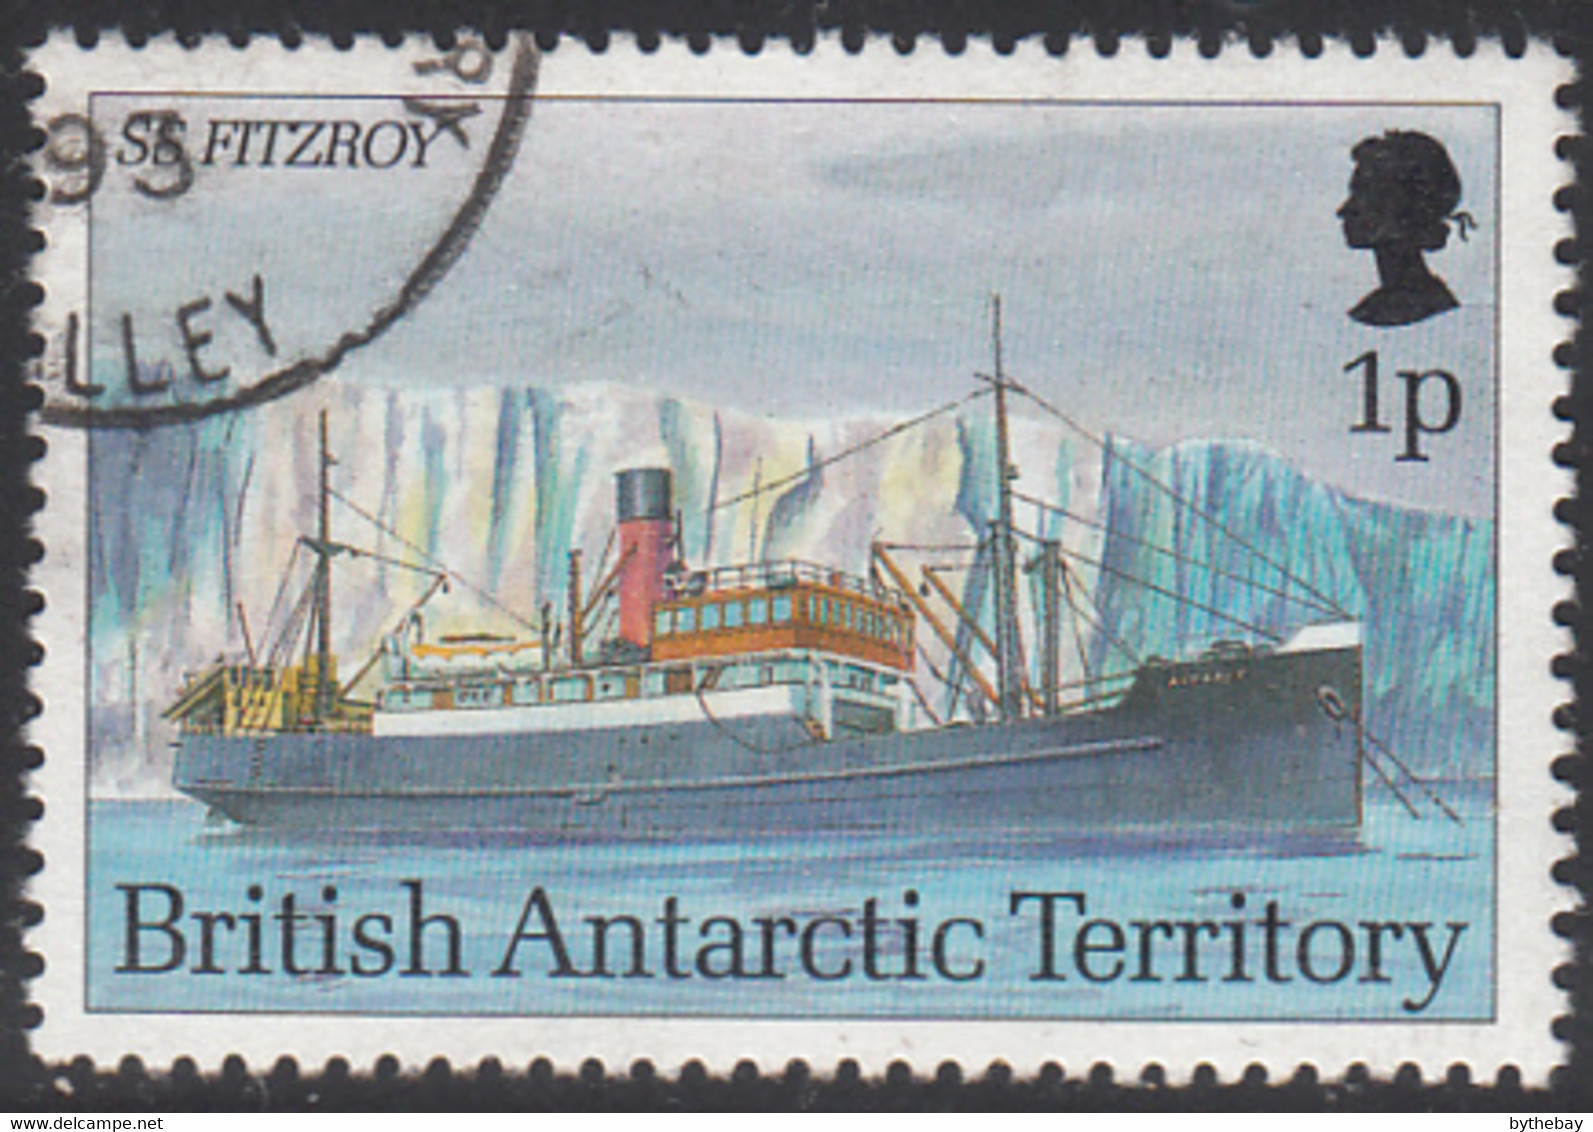 British Antarctic Territory 1993 Used Sc #202 1p SS Fitzroy Research Ships - Usados